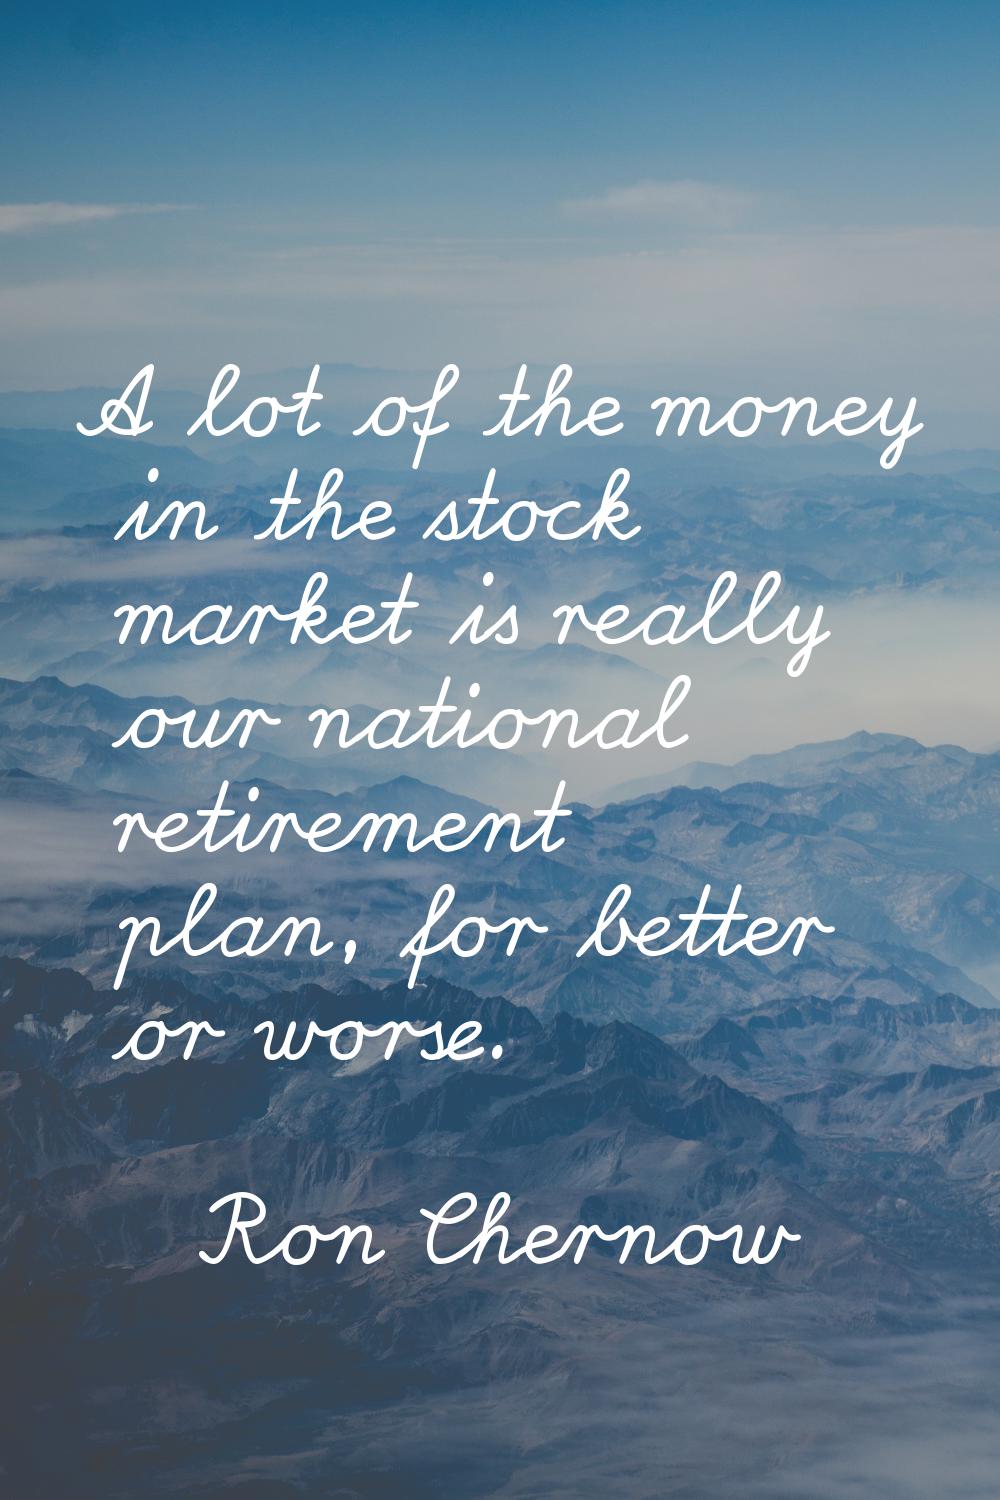 A lot of the money in the stock market is really our national retirement plan, for better or worse.